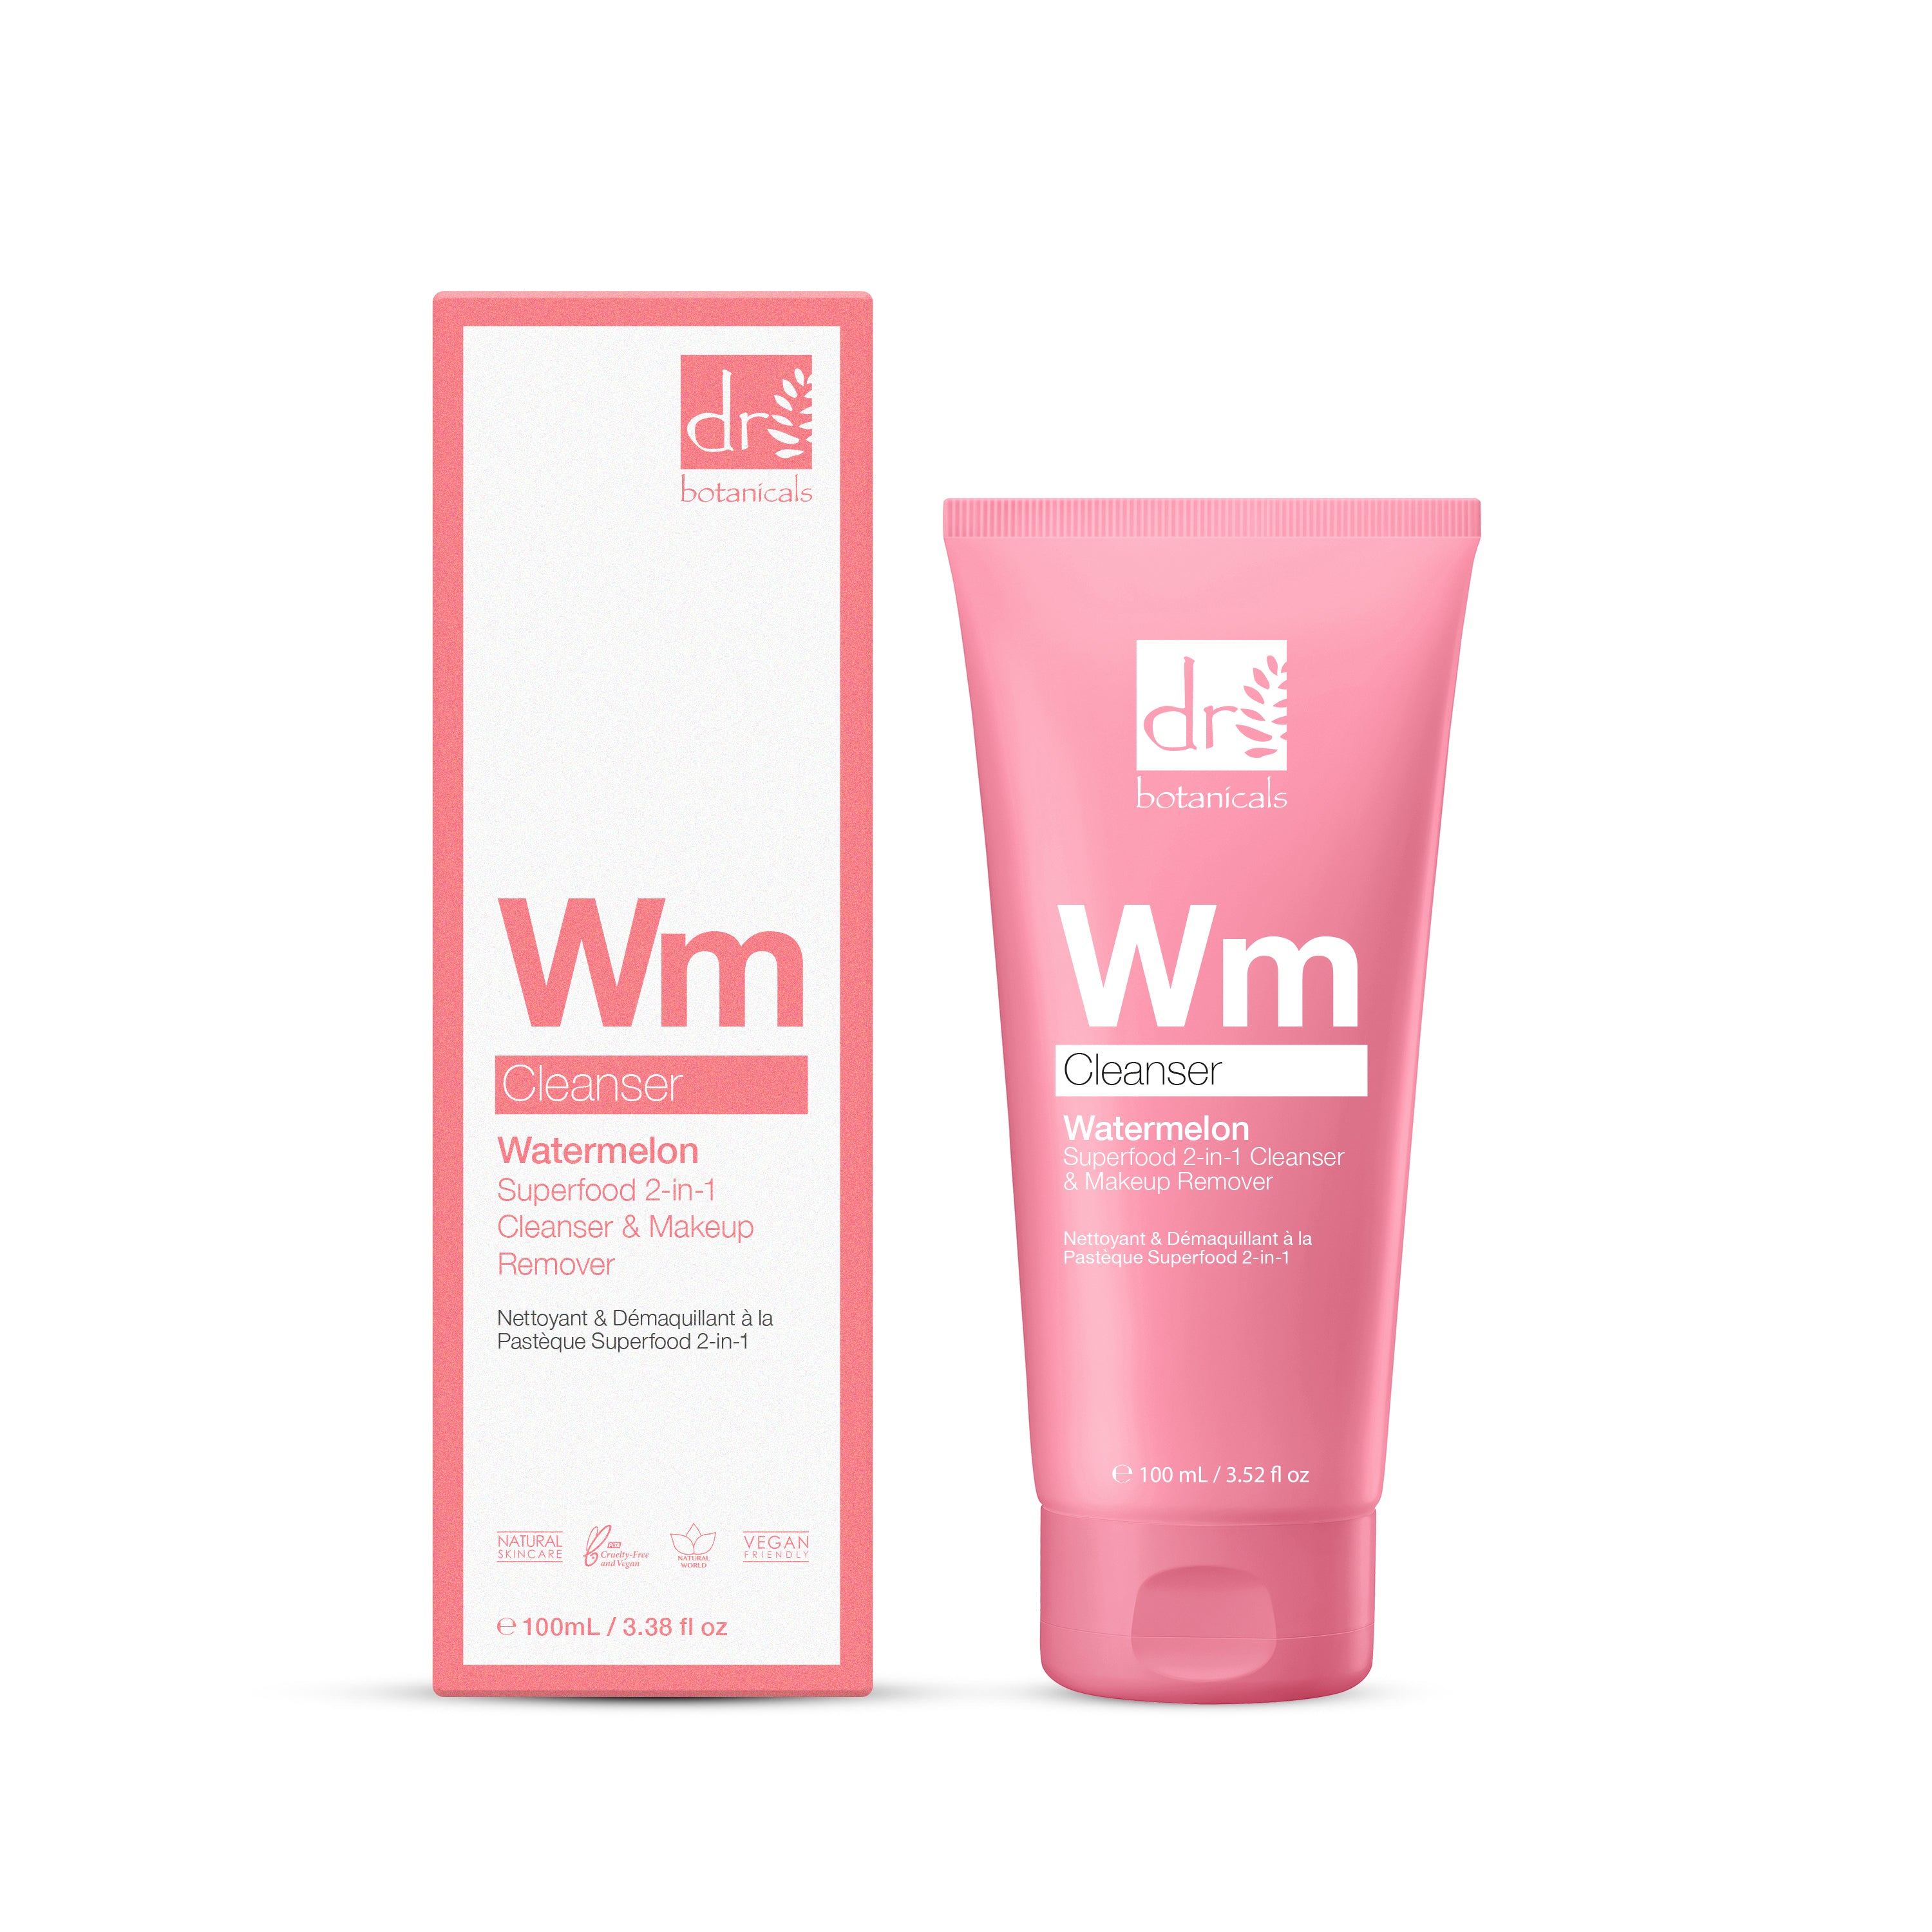 Watermelon 2in1 Cleanser & Makeup Remover (3.52 oz)